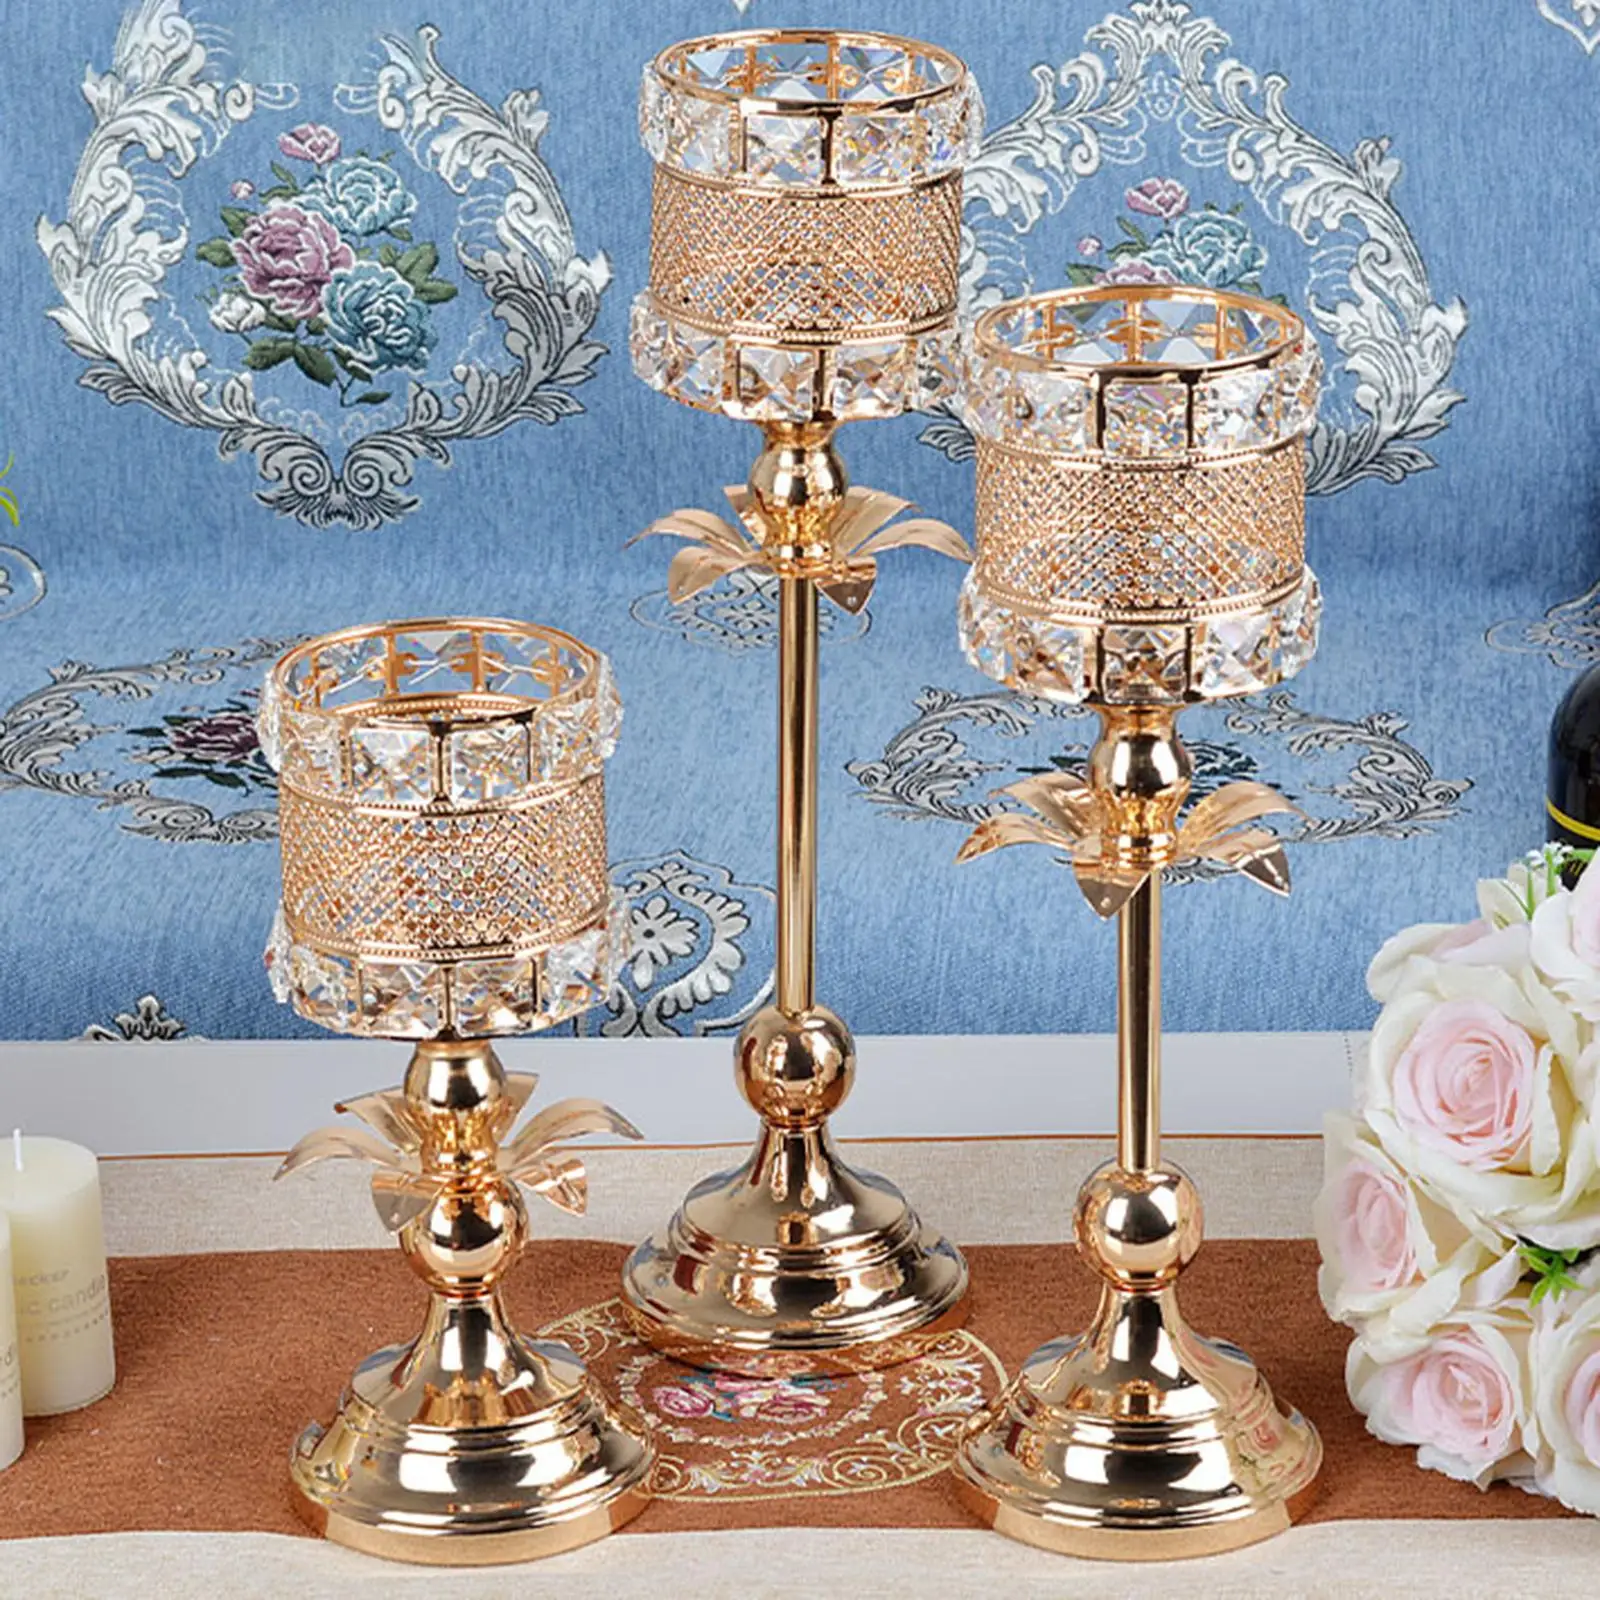 Vintage Style Crystal Candle Holder Tea Light Candelabrum Votive Candles Crafts Candlestick for Wedding Table Anniversary Party